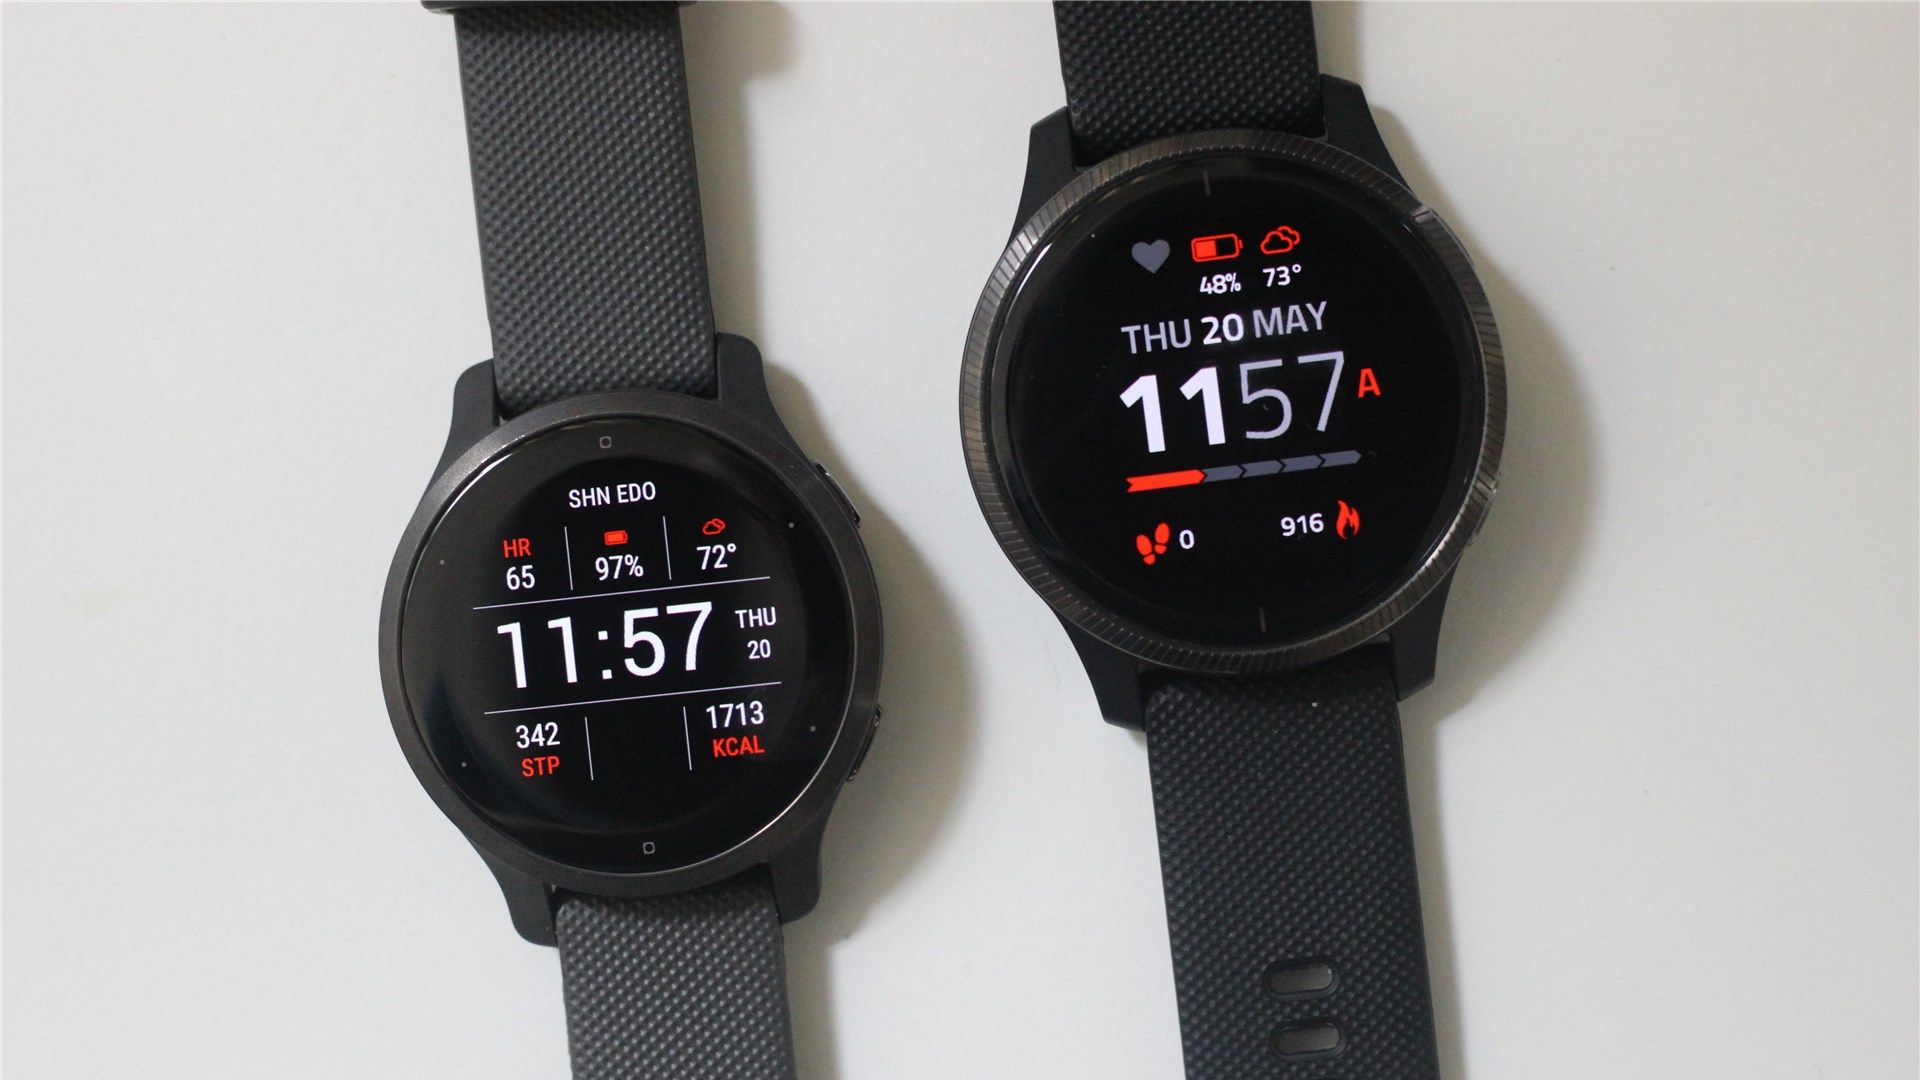 Garmin Venu 2 vs. Venu 2S: What's the difference and which size should you  buy?